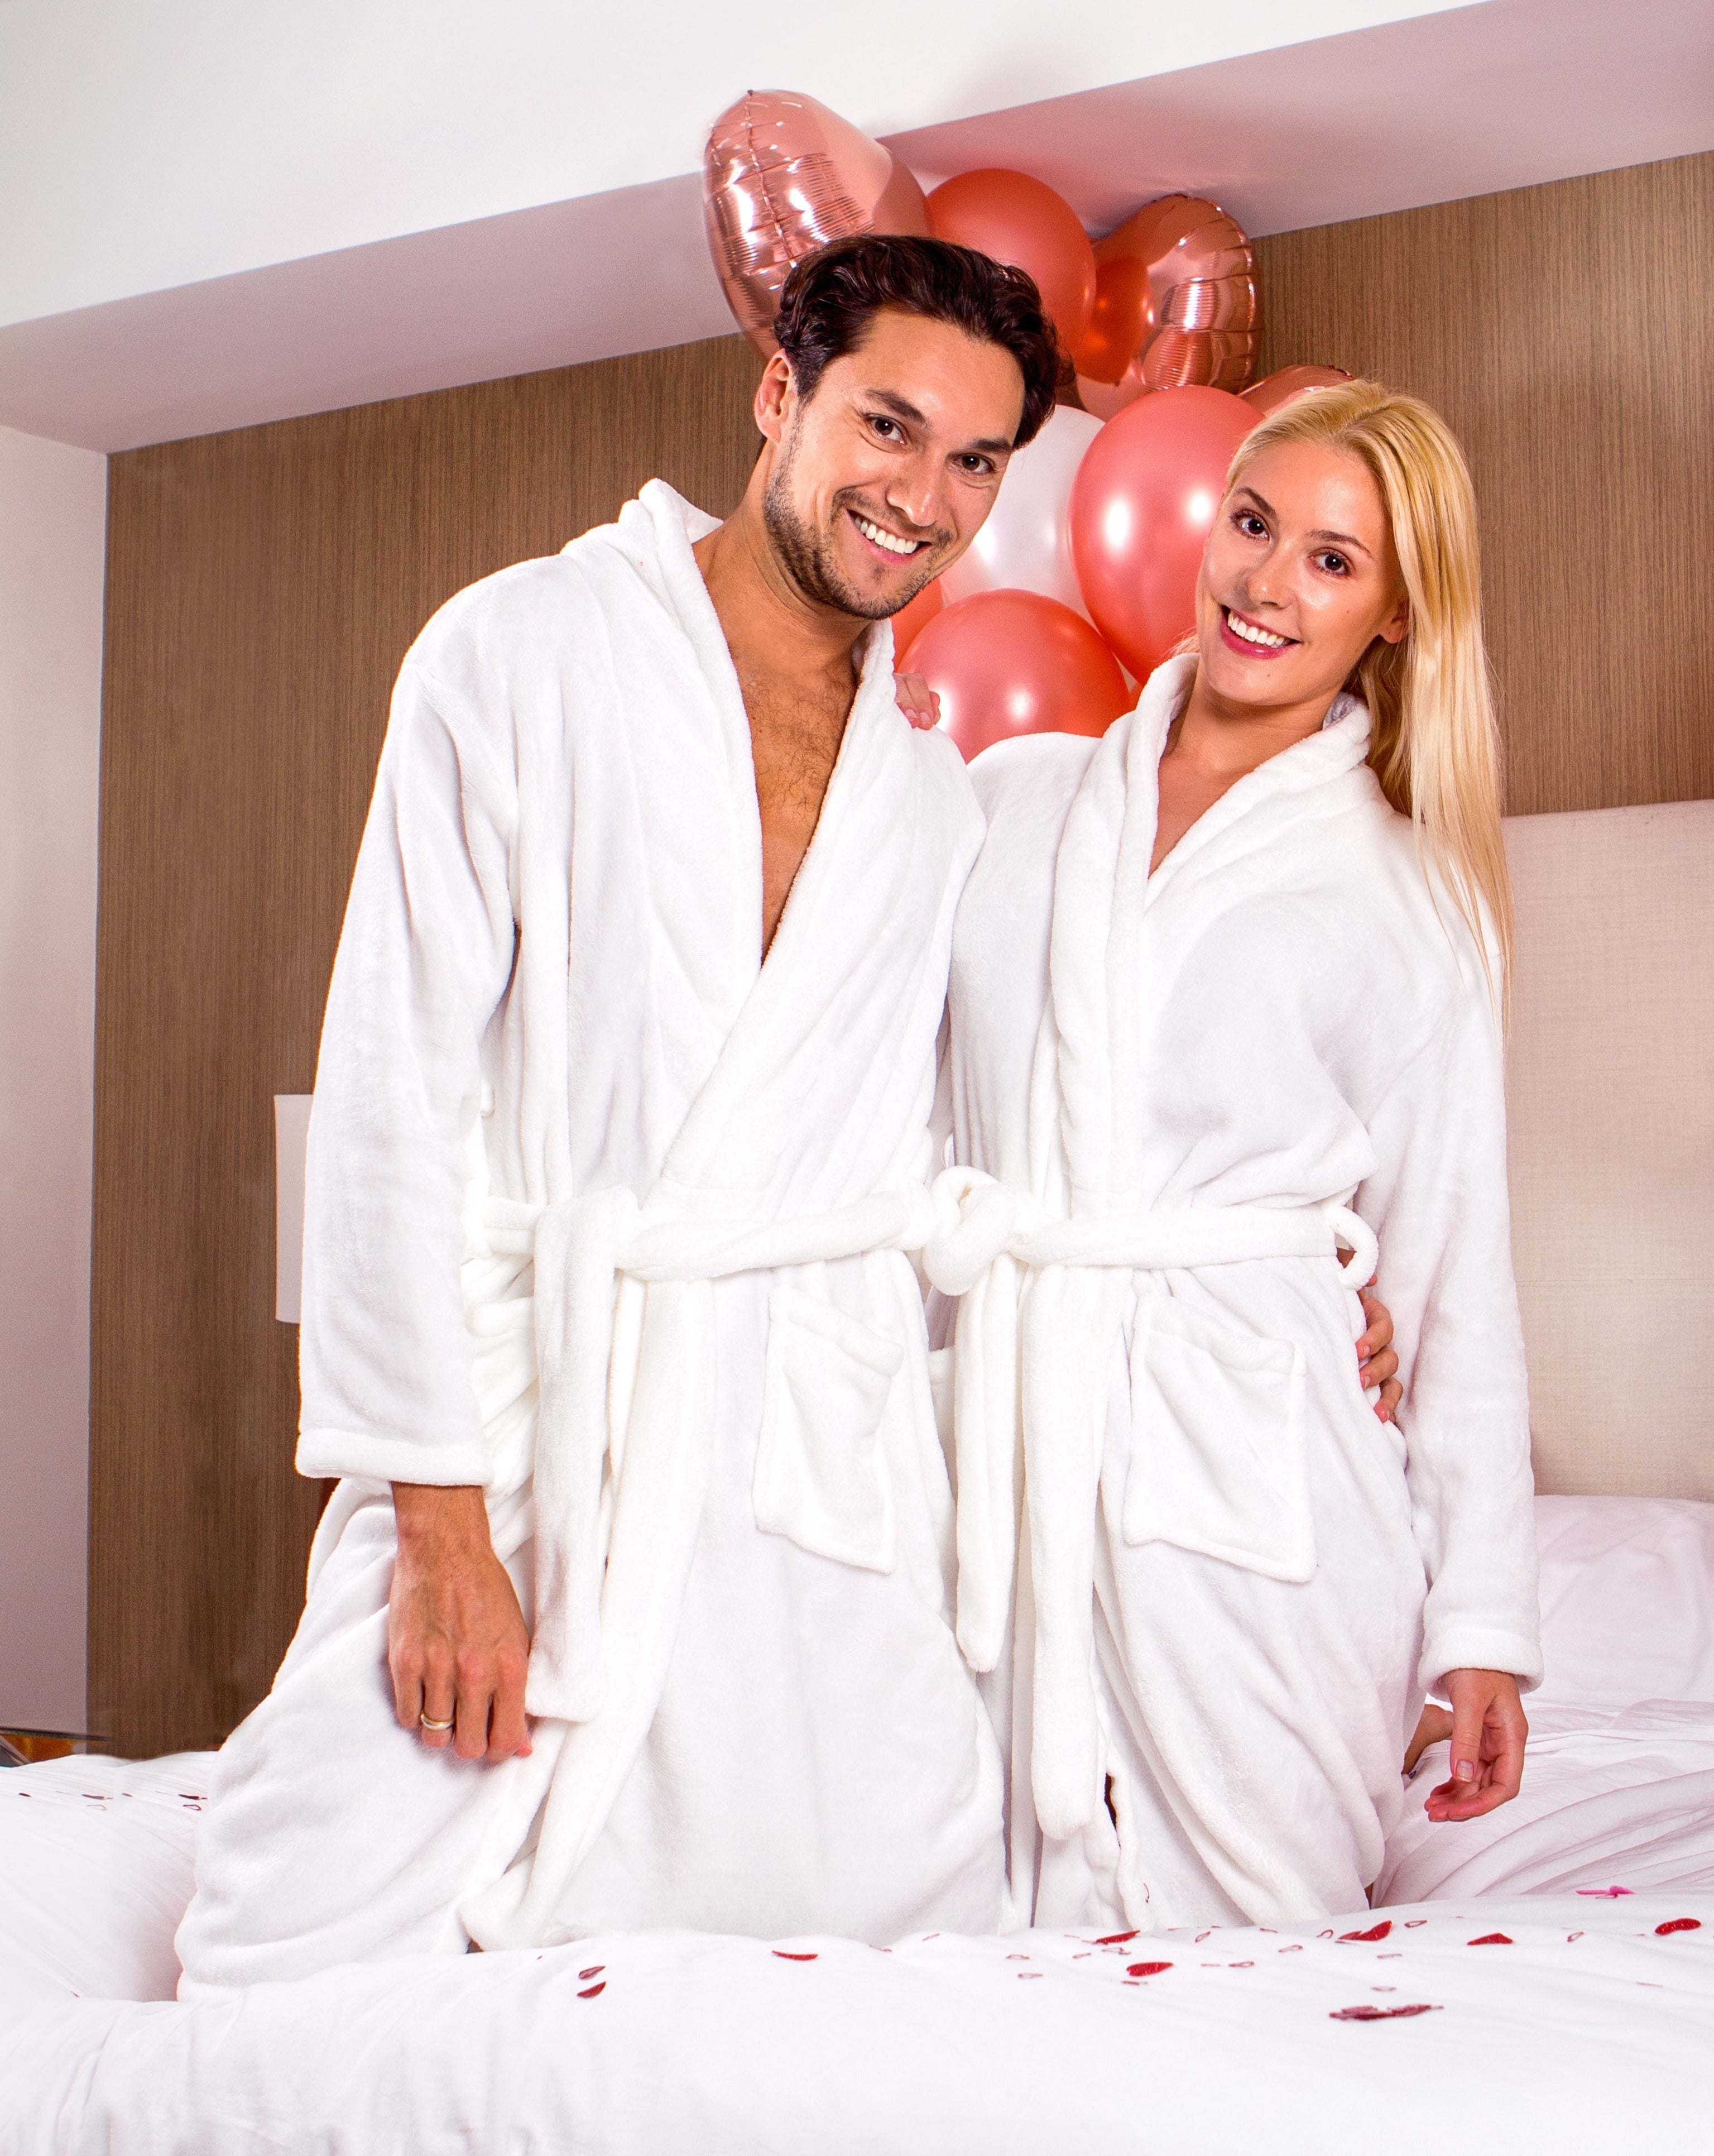 King and Queen Bathrobes, Mr and Mrs Robes, Matching Robes, Plush bathrobes  for Couple, Anniversary Gift, Honeymoon Gift Cozy terry